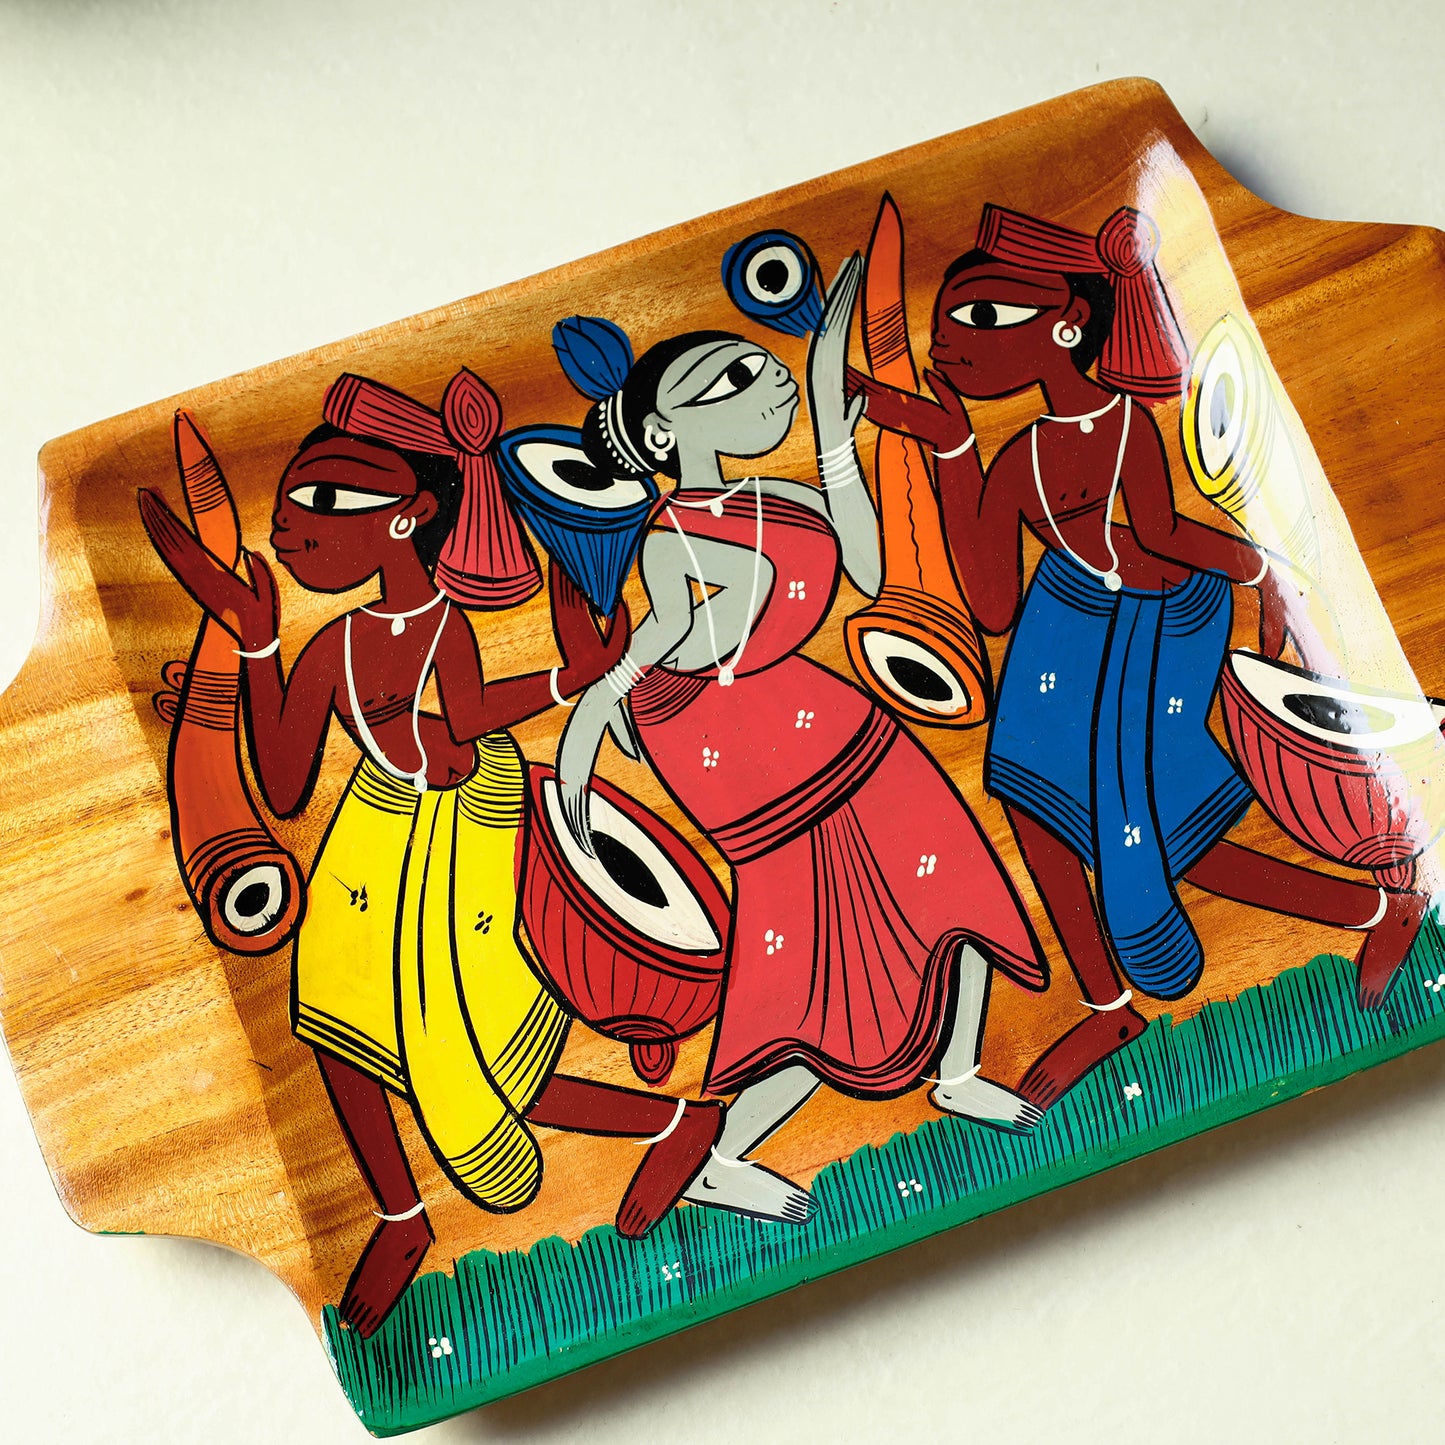 Traditional Pattachitra Hand Painted Akashmoni Wooden Tray (8 x 12 in)